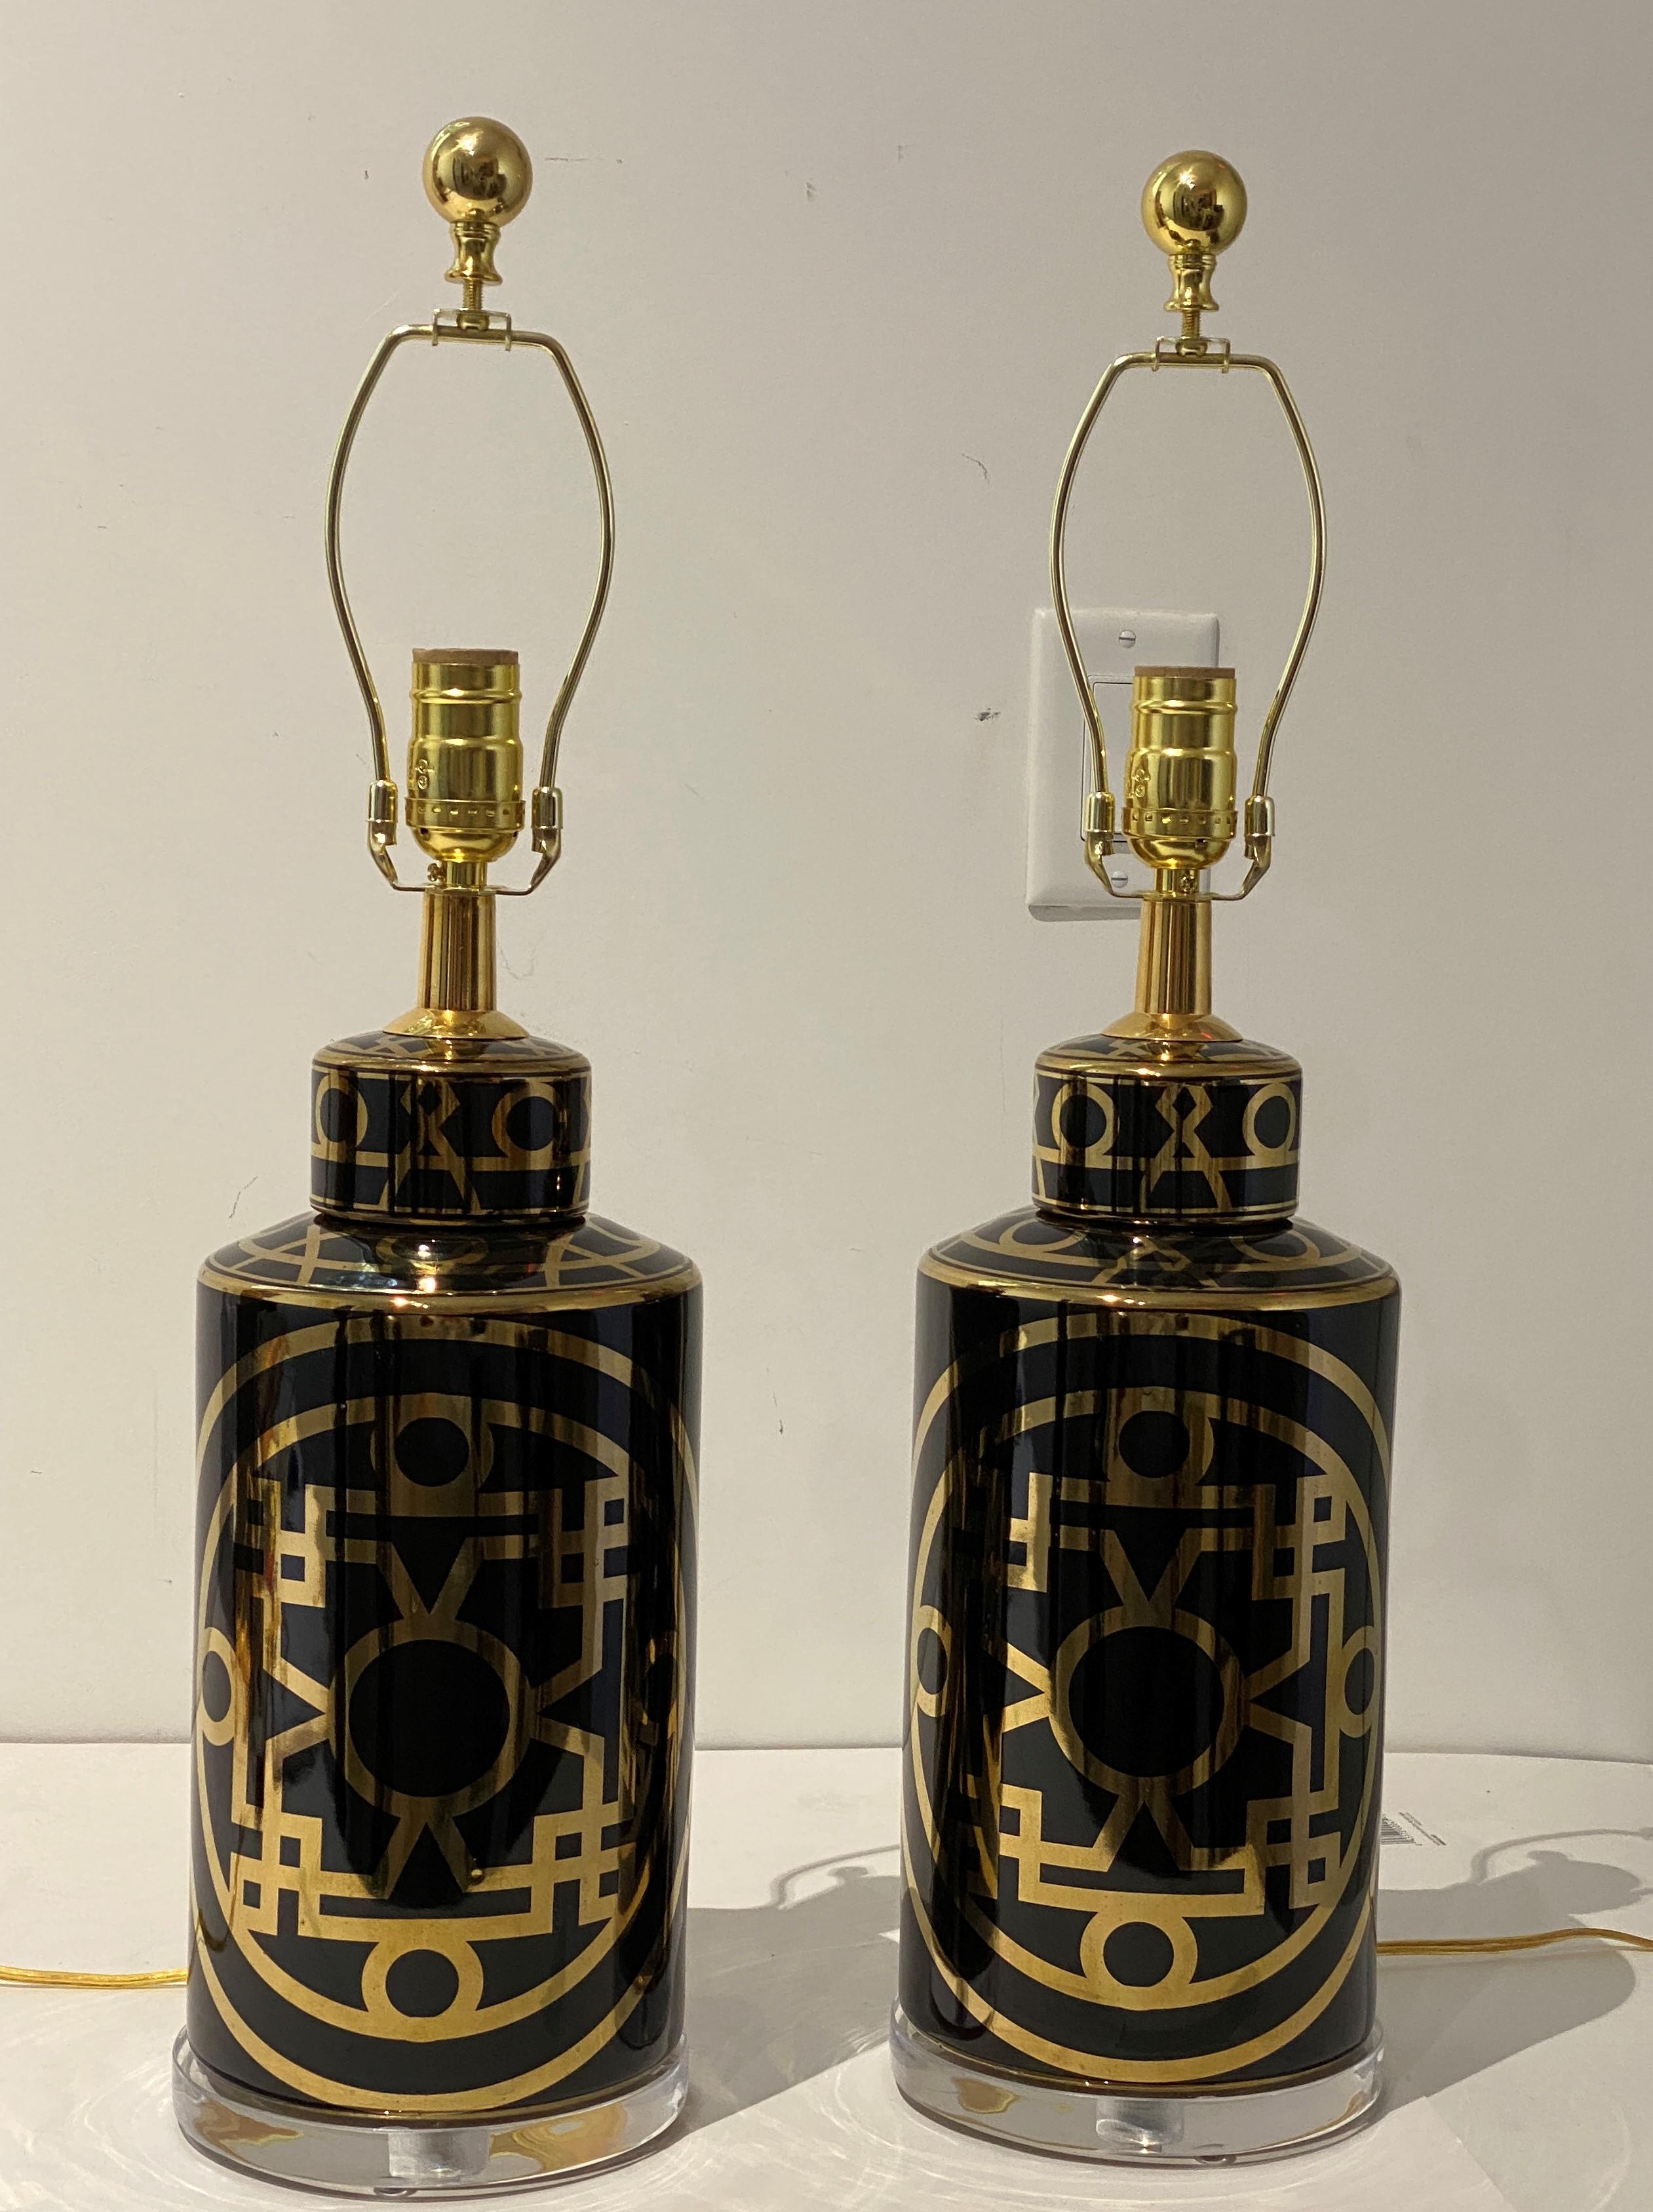 New custom shades are available and can be shipped with the table lamp bases.

This stylish and chic pair of table lamps have that Hollywood Regency vibe, with their black and gold coloration and stylized Chinese symbols. 

Note: Heigth to top